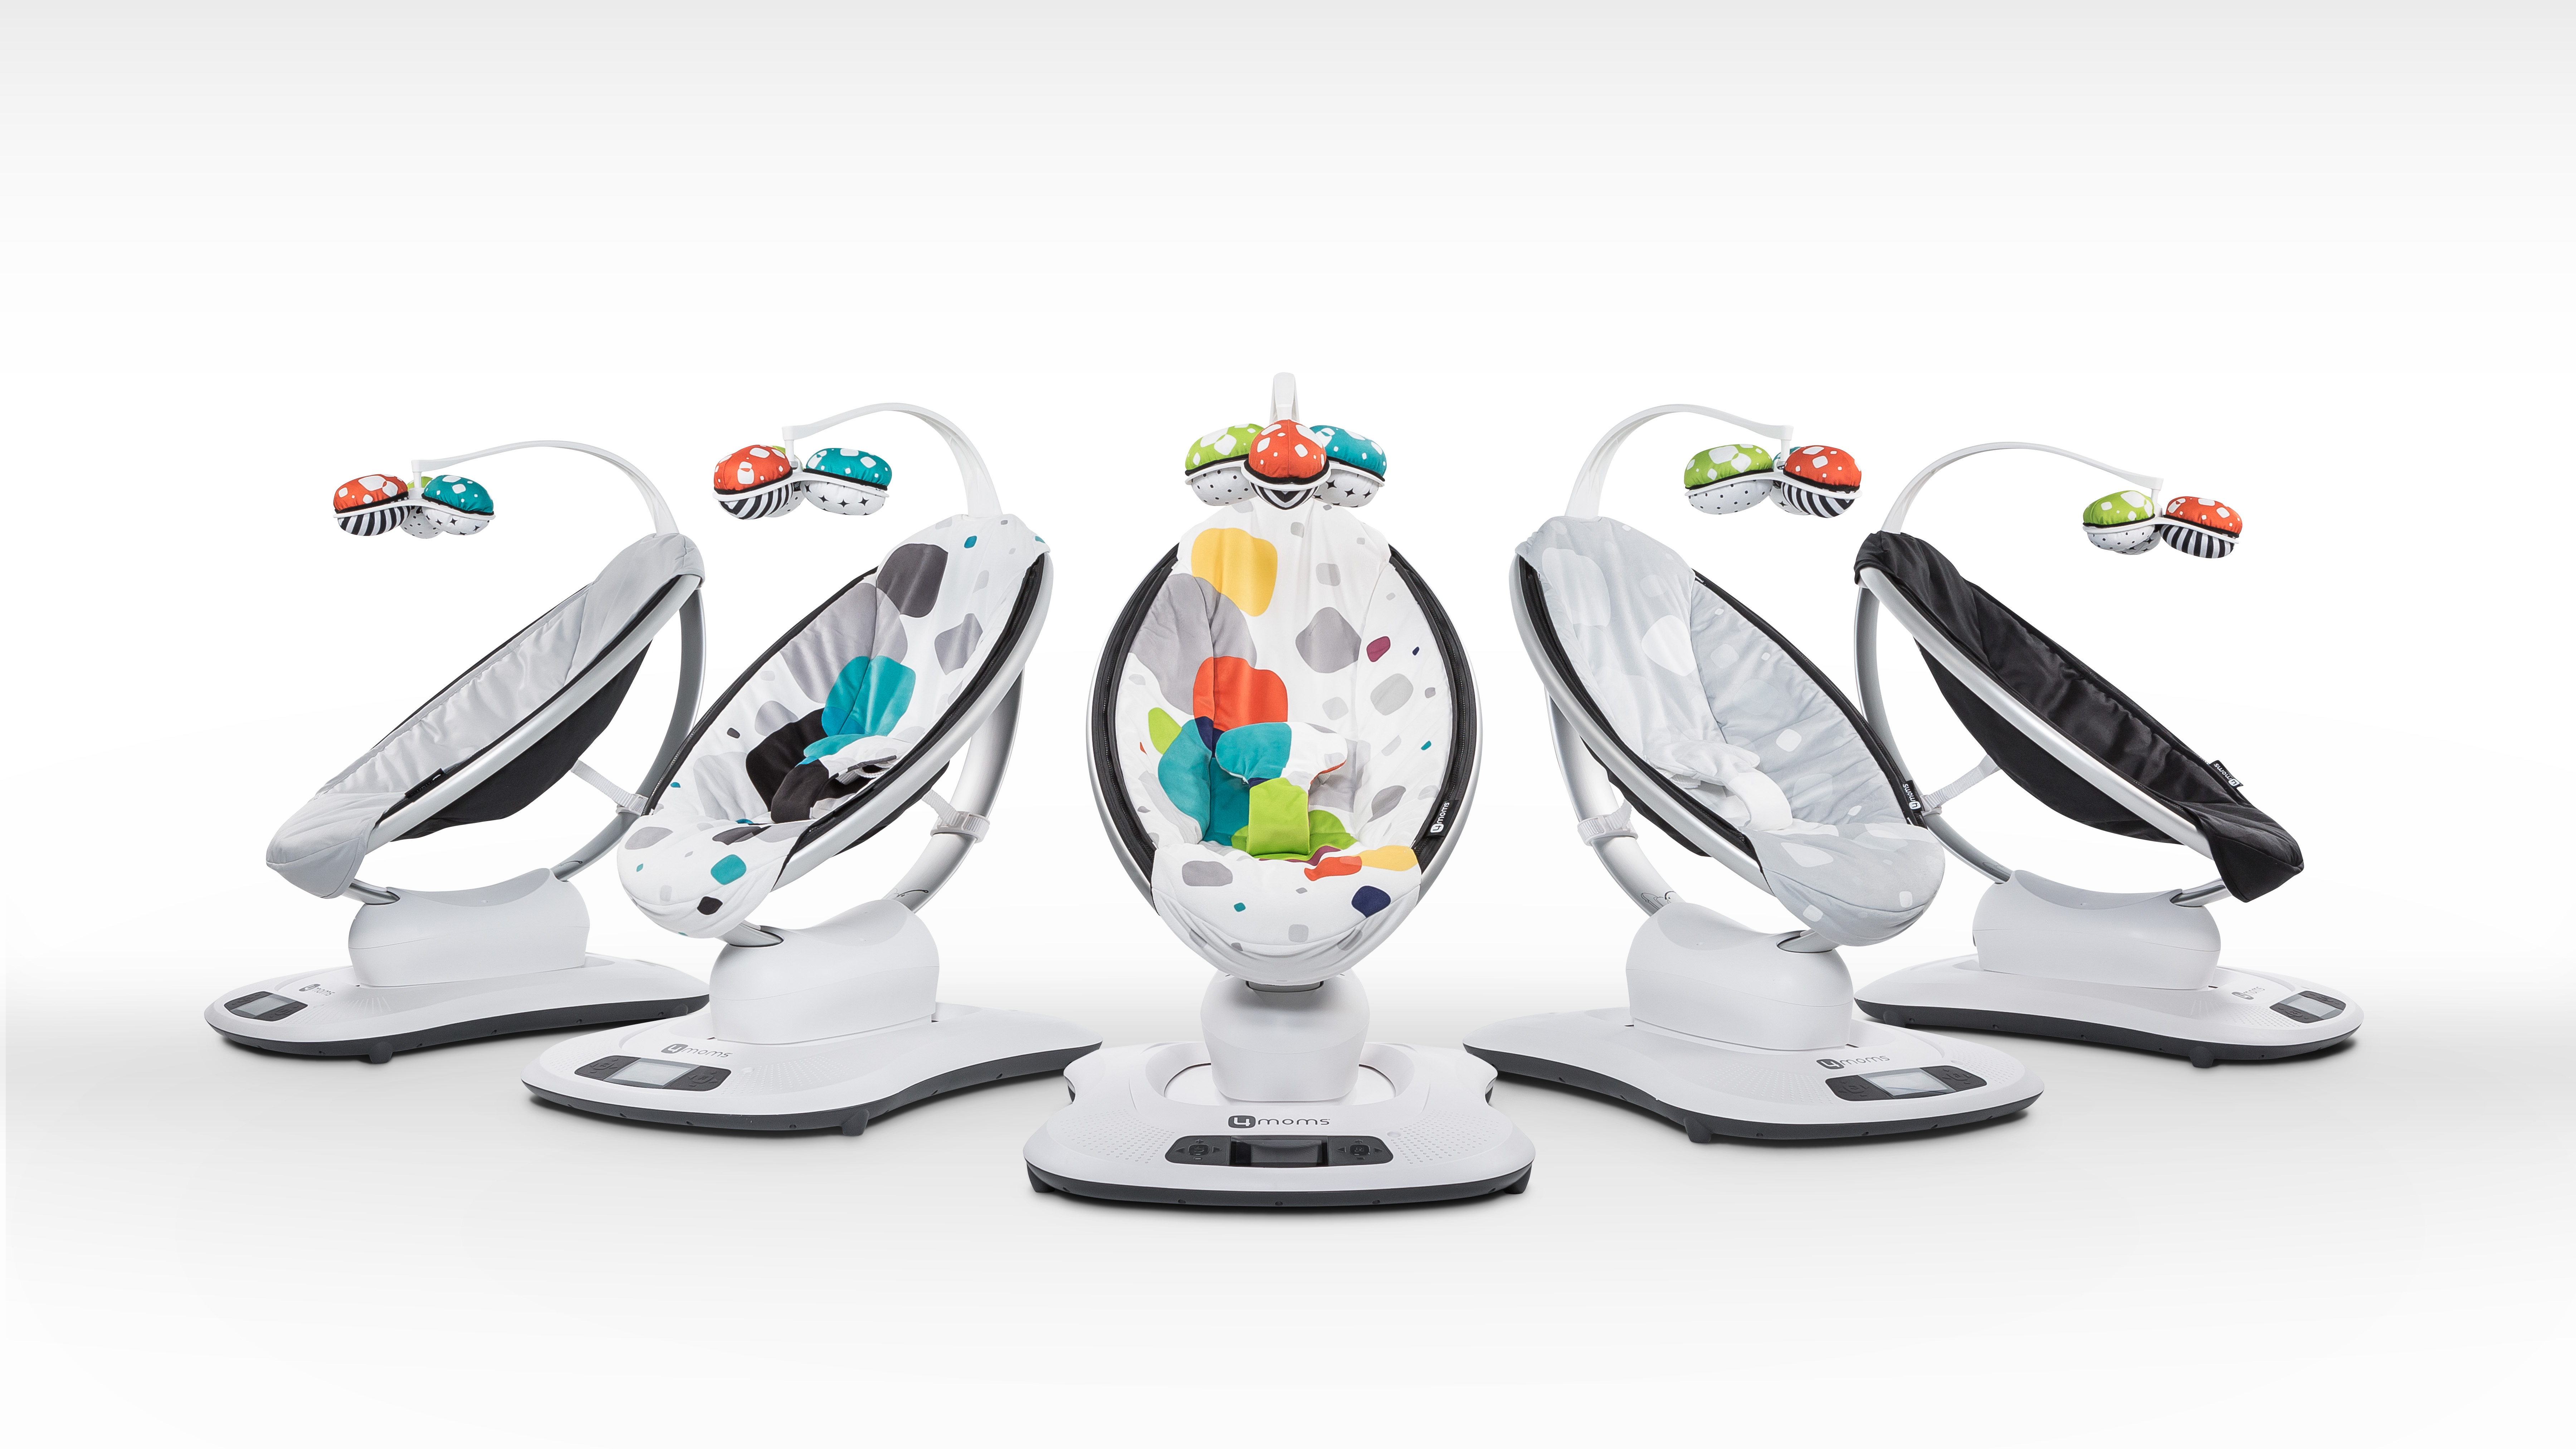 4moms mamaroo bluetooth connection